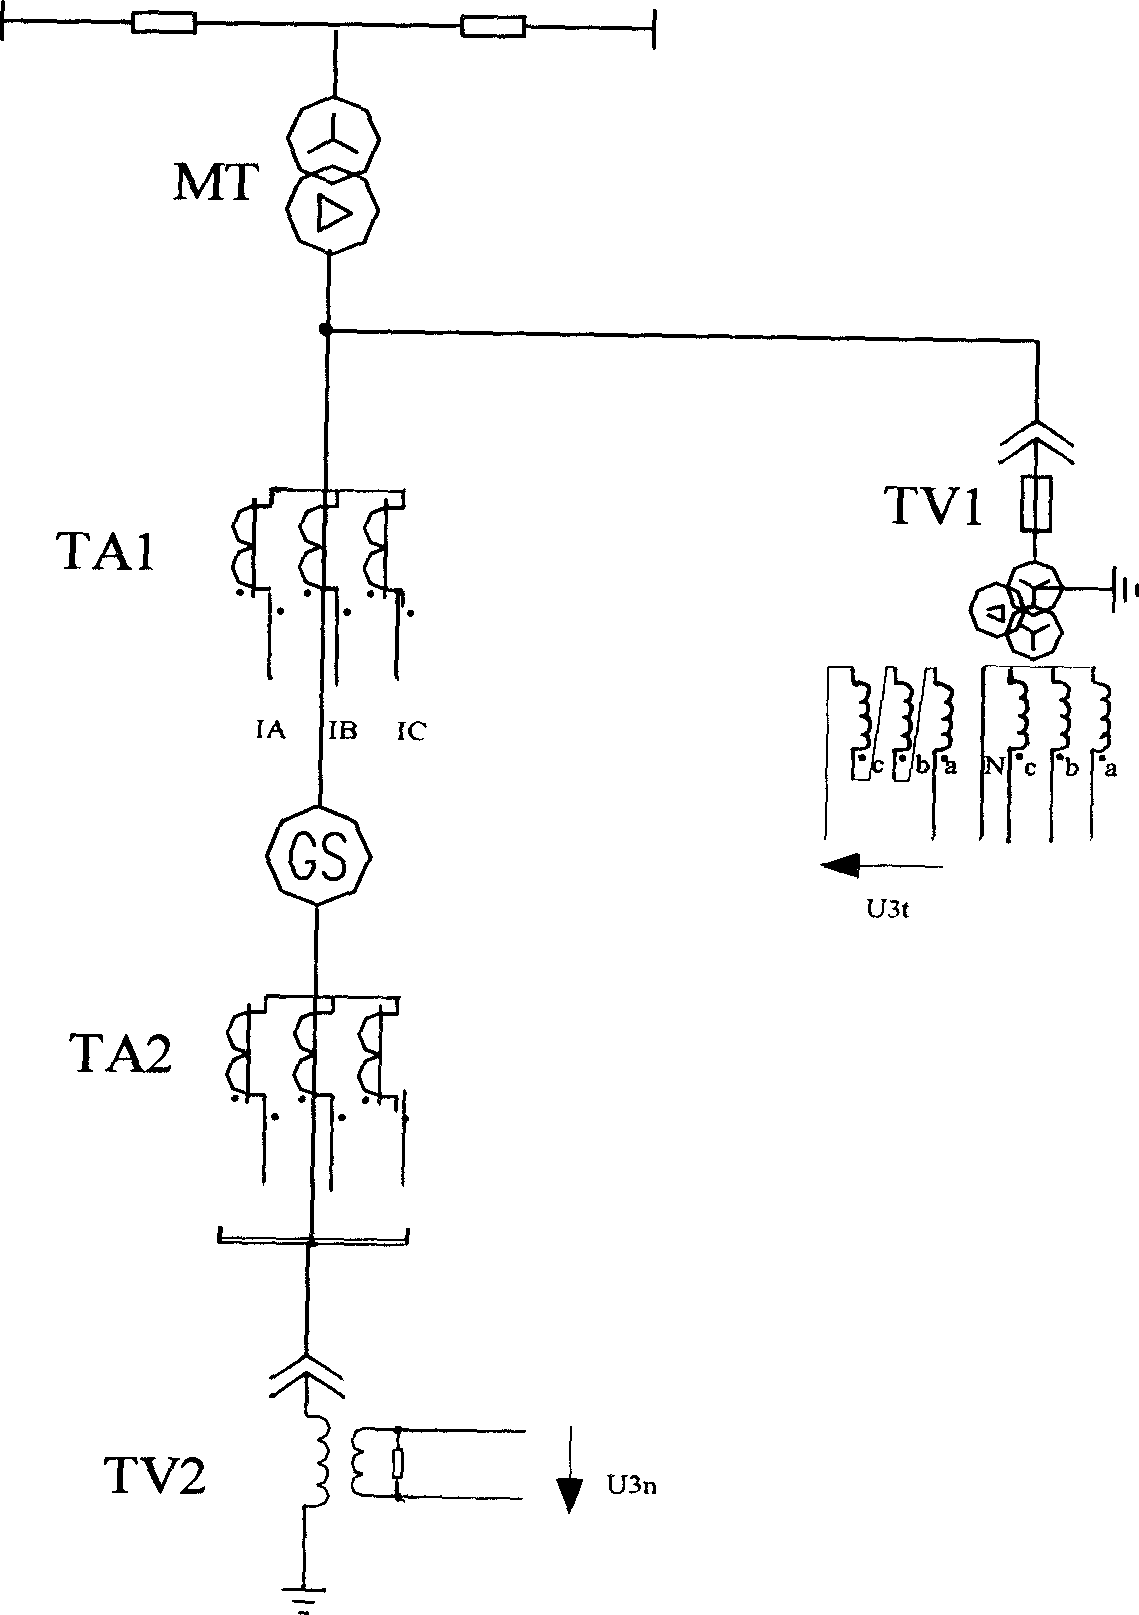 Stator grounding protection with combined third harmonic dynamic alignment criterion and voltage ratio criterion